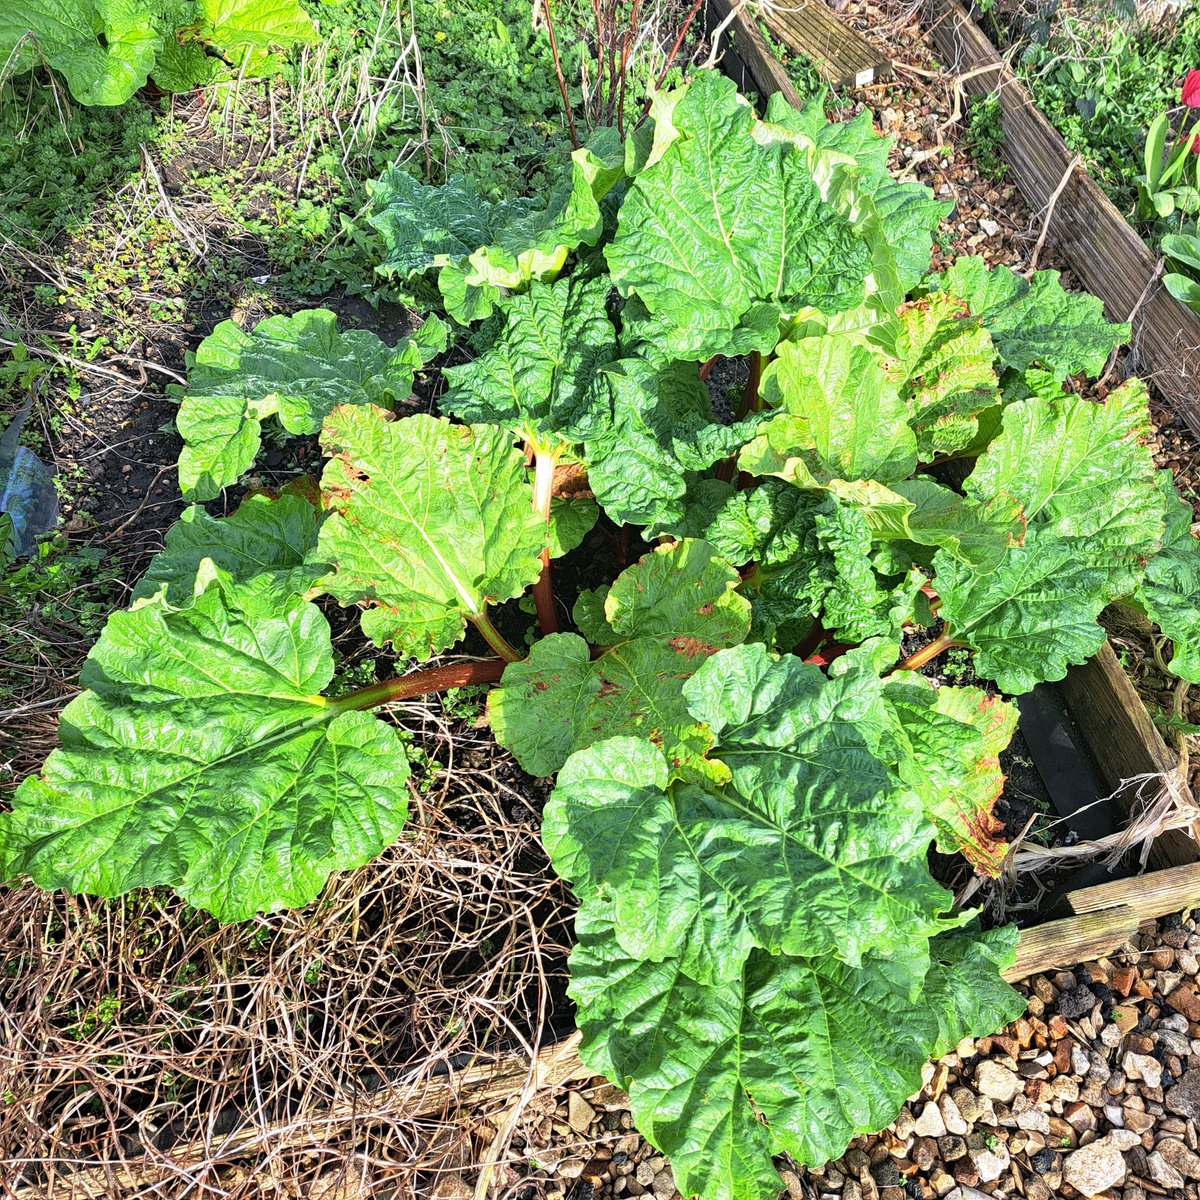 New on my blog this week: I'm Talking #Rhubarb - a celebration of the fruit now taking over my #Cotswold garden (plus a link to the old #EricSykes silent film, 'Rhubarb Rhubarb'!) authordebbieyoung.com/2024/05/01/tal…